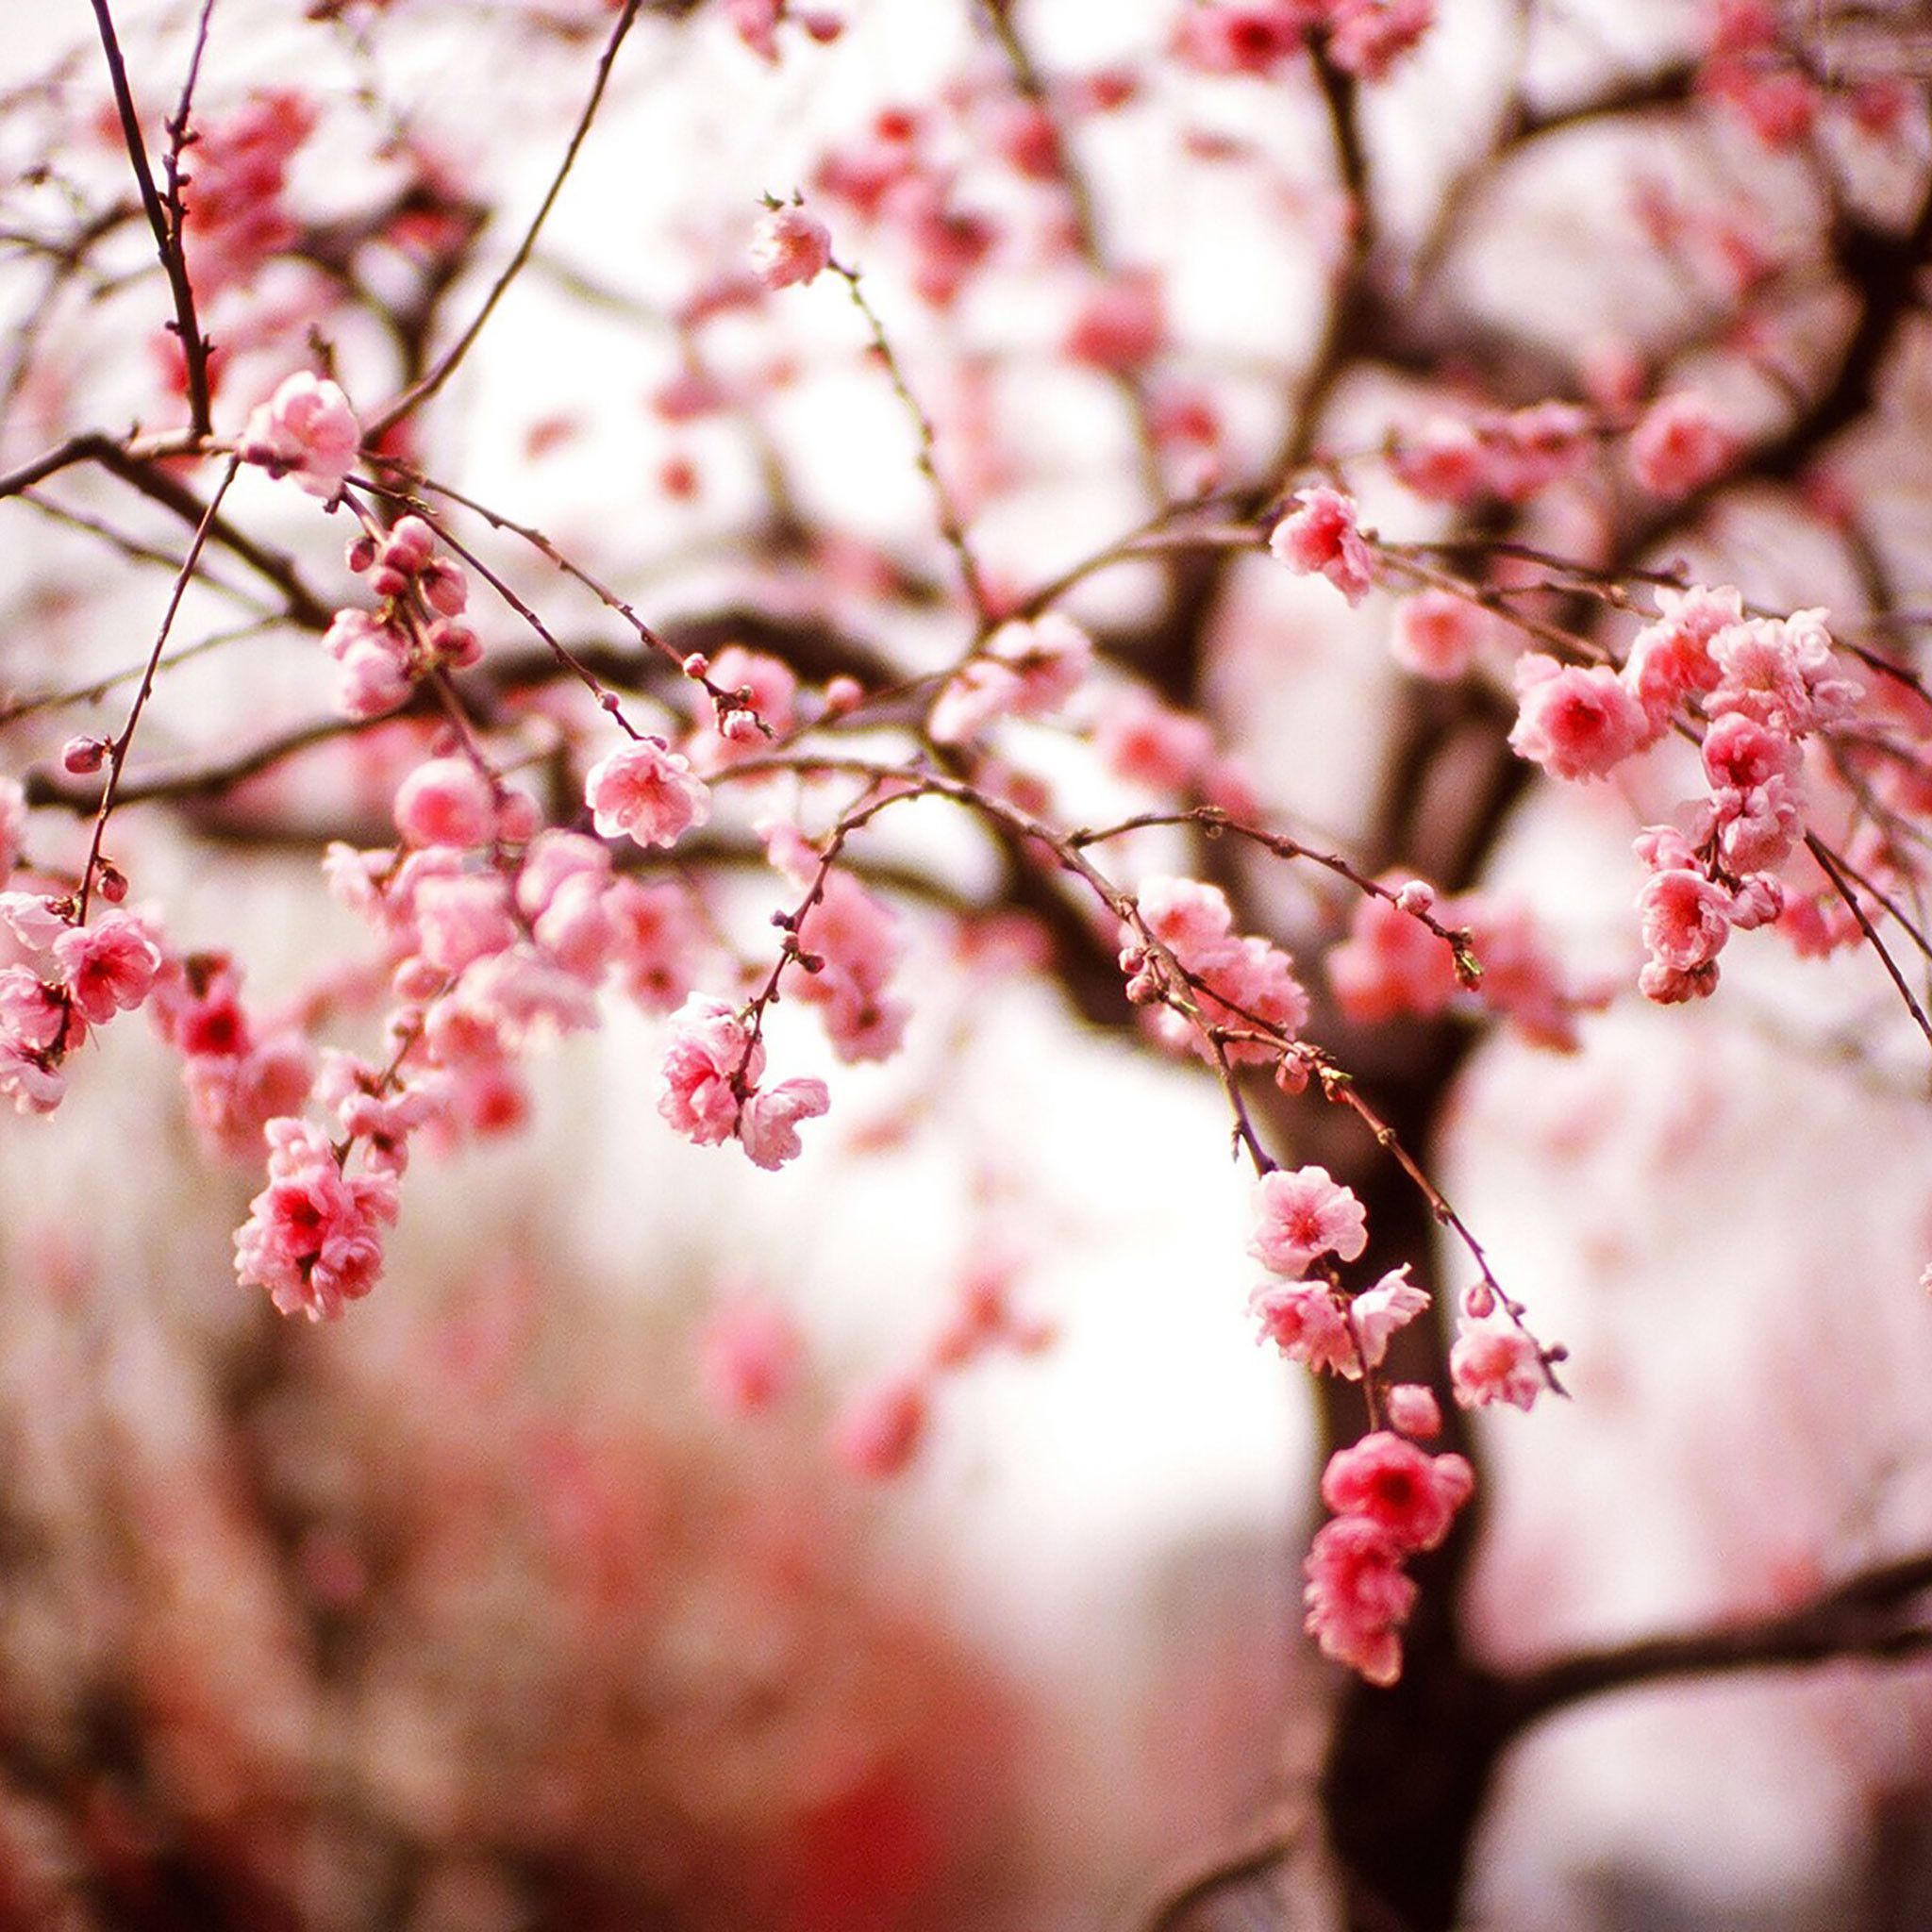 A tree with pink flowers in the background - Spring